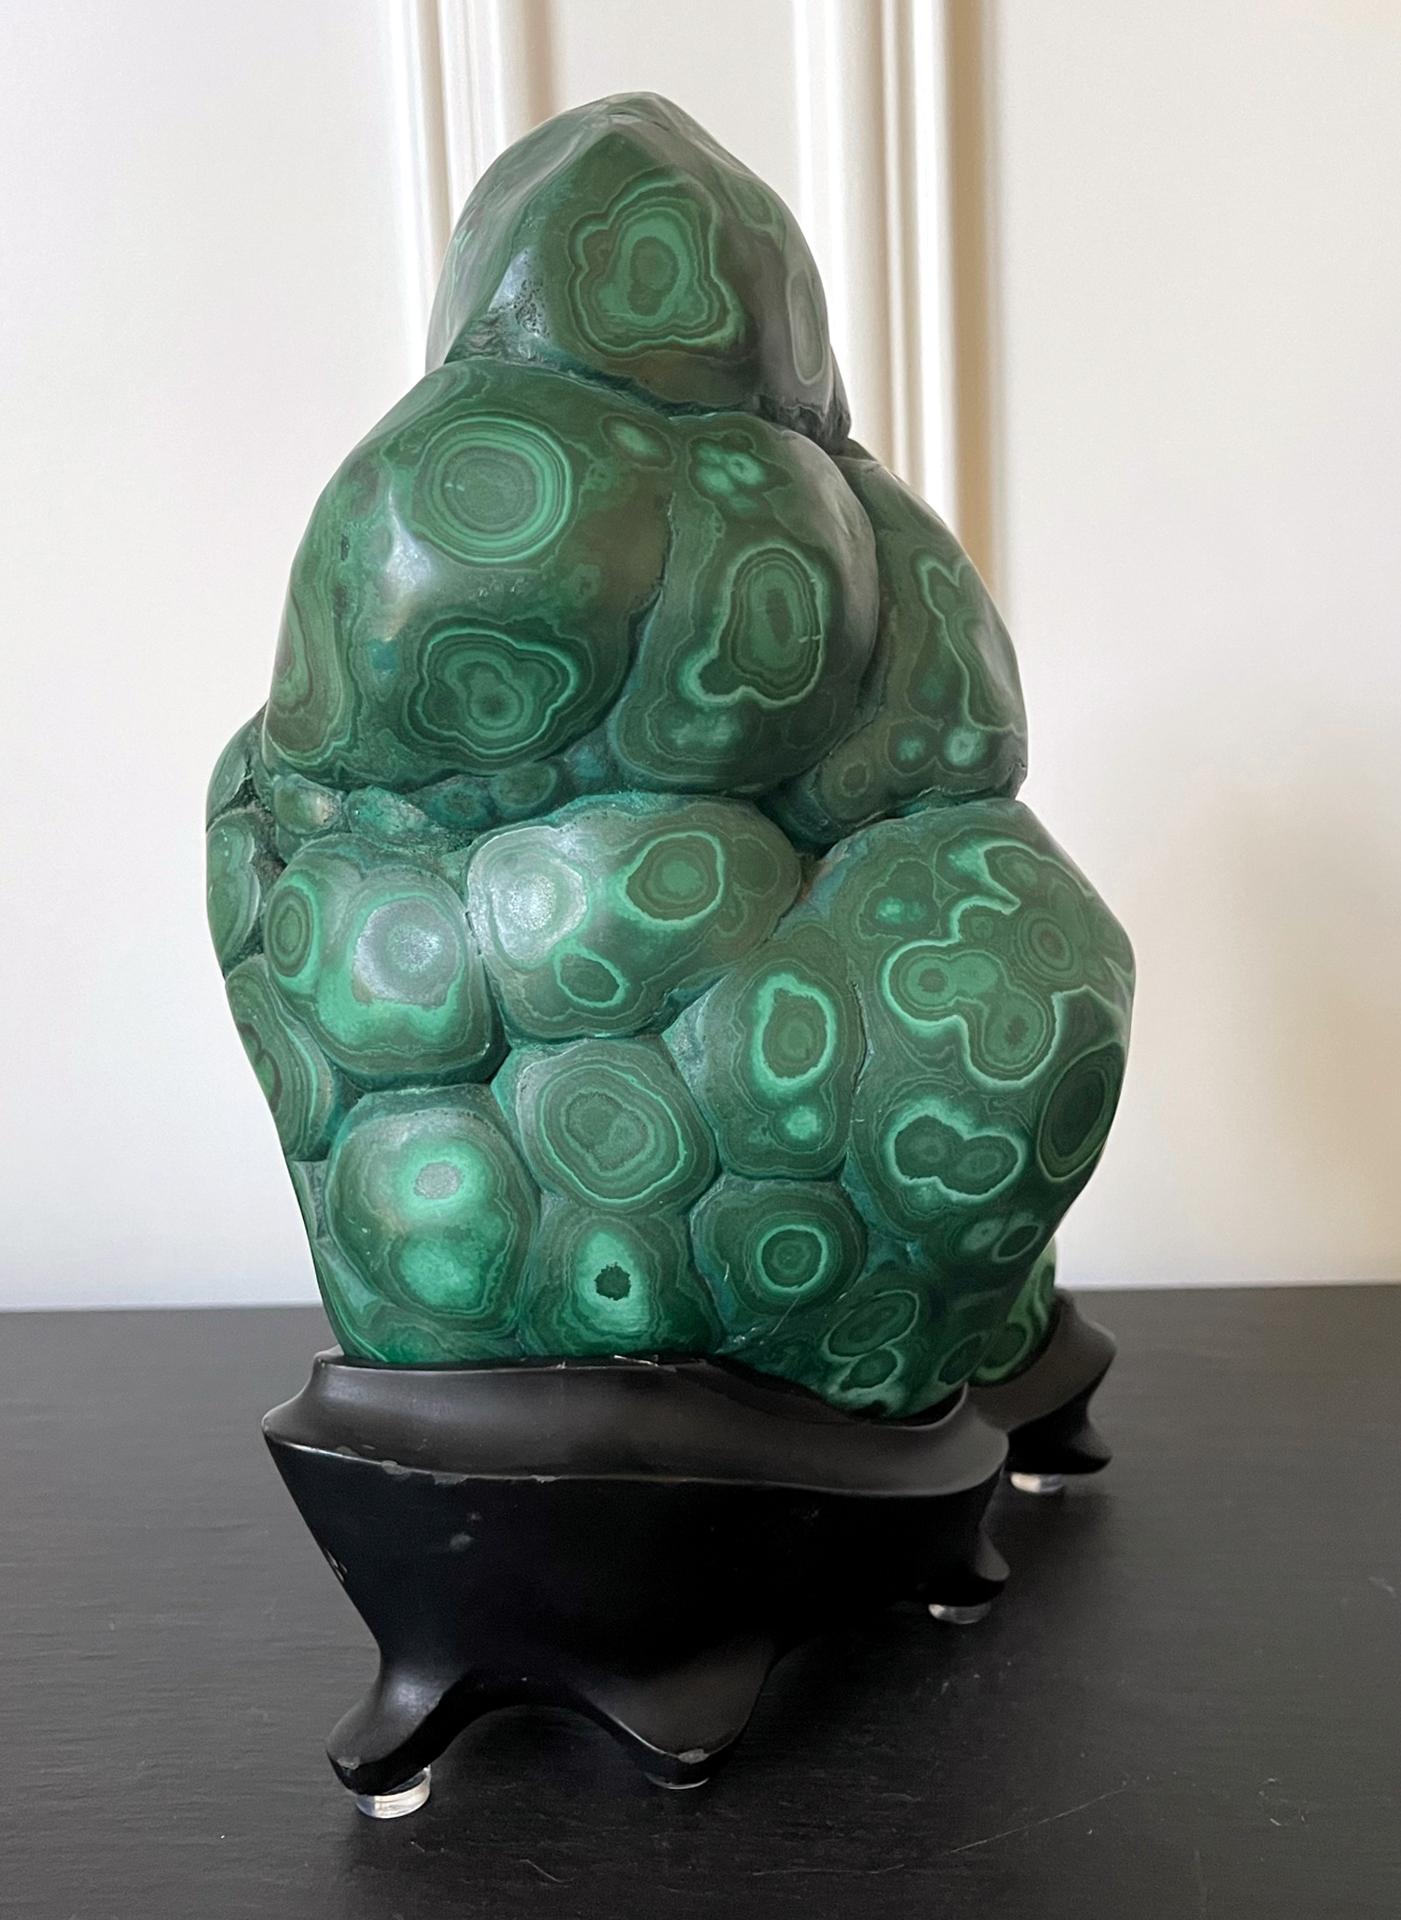 Malachite Rock on Display Stand as a Chinese Scholar Stone 1